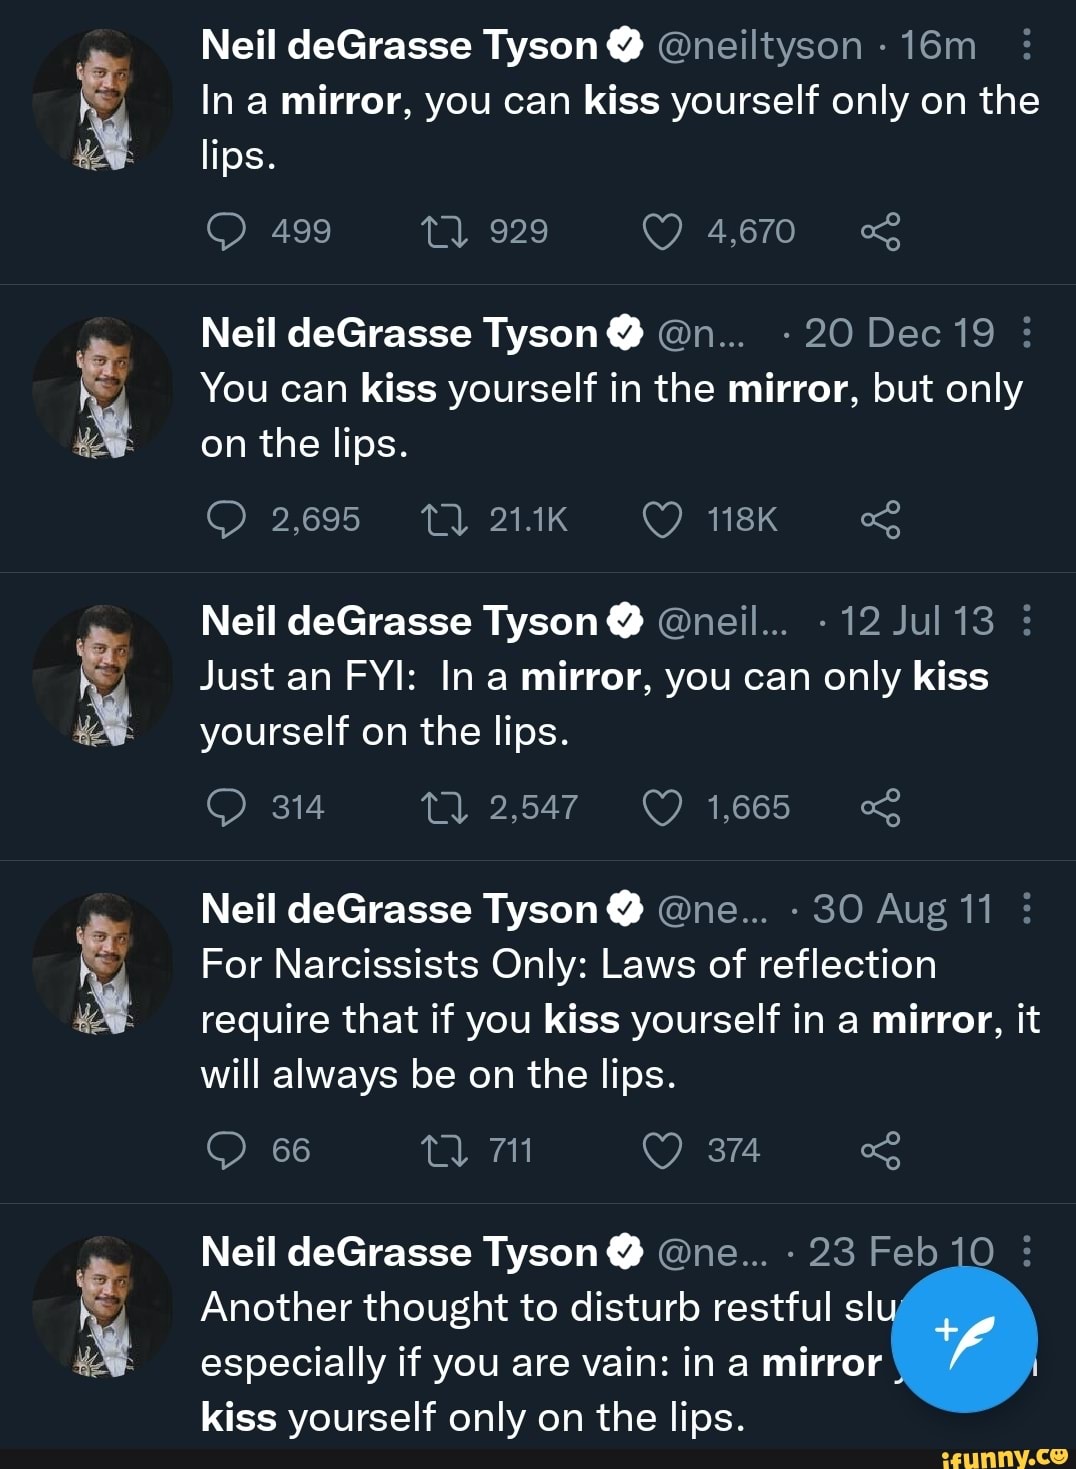 Neil Degrasse Tyson Neiltyson In A Mirror You Can Kiss Yourself Only On The Lips 499 Tt 929 6119